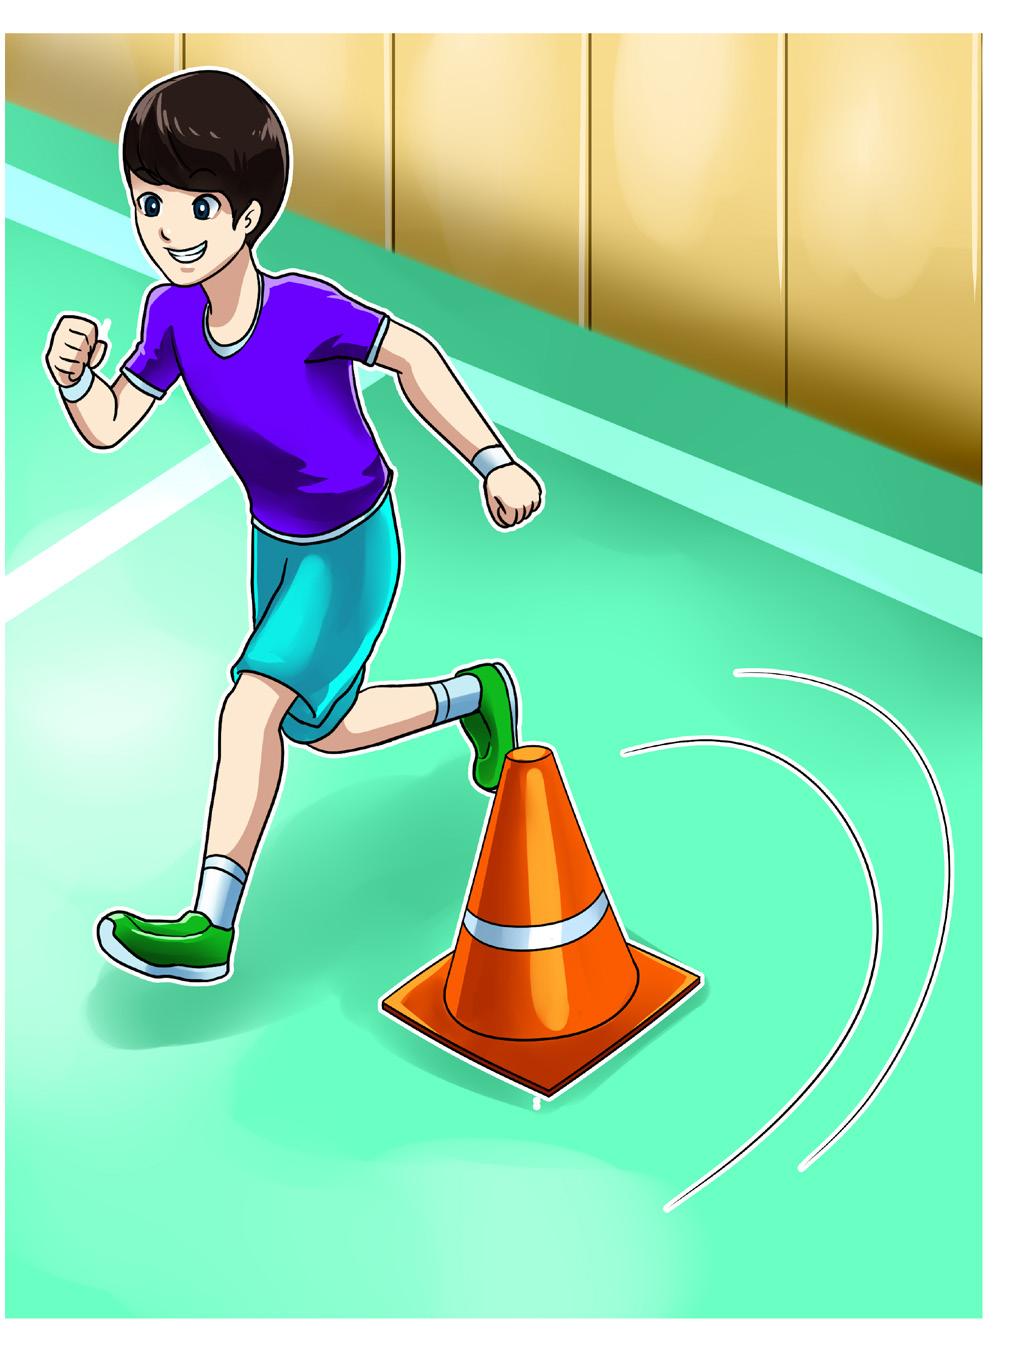 Running games 2 The idea behind running games is for children to get moving and develop speed. As part of athletics, this can include skills such as starting and turning.